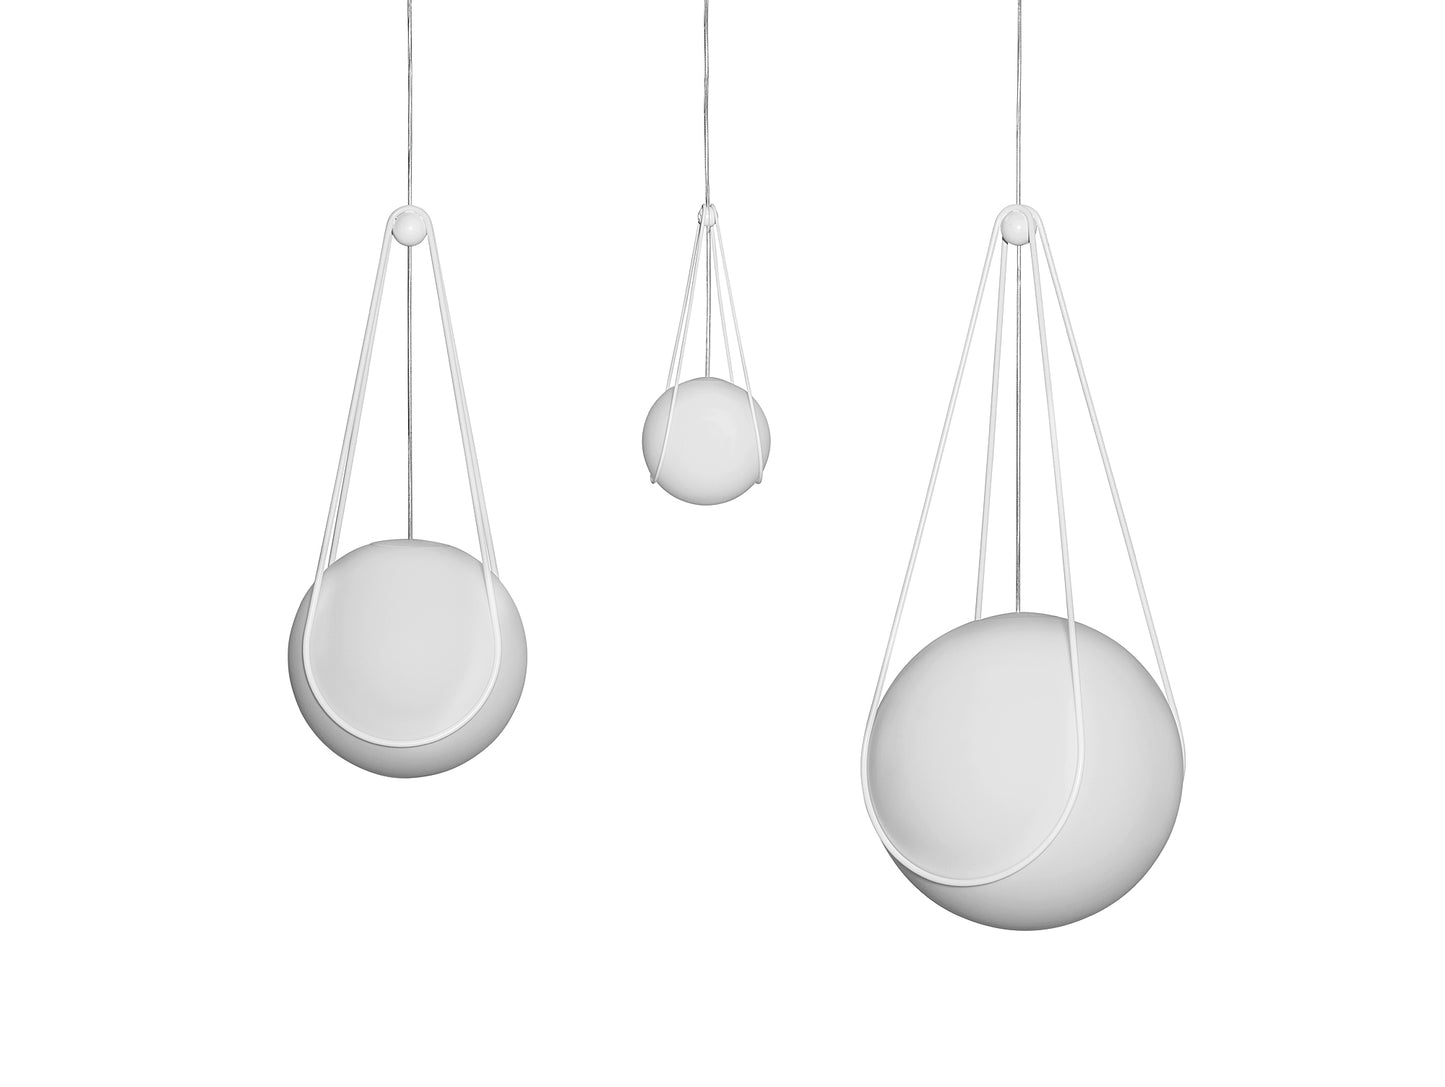 Luna and White Kosmos Lamp by Design House Stockholm